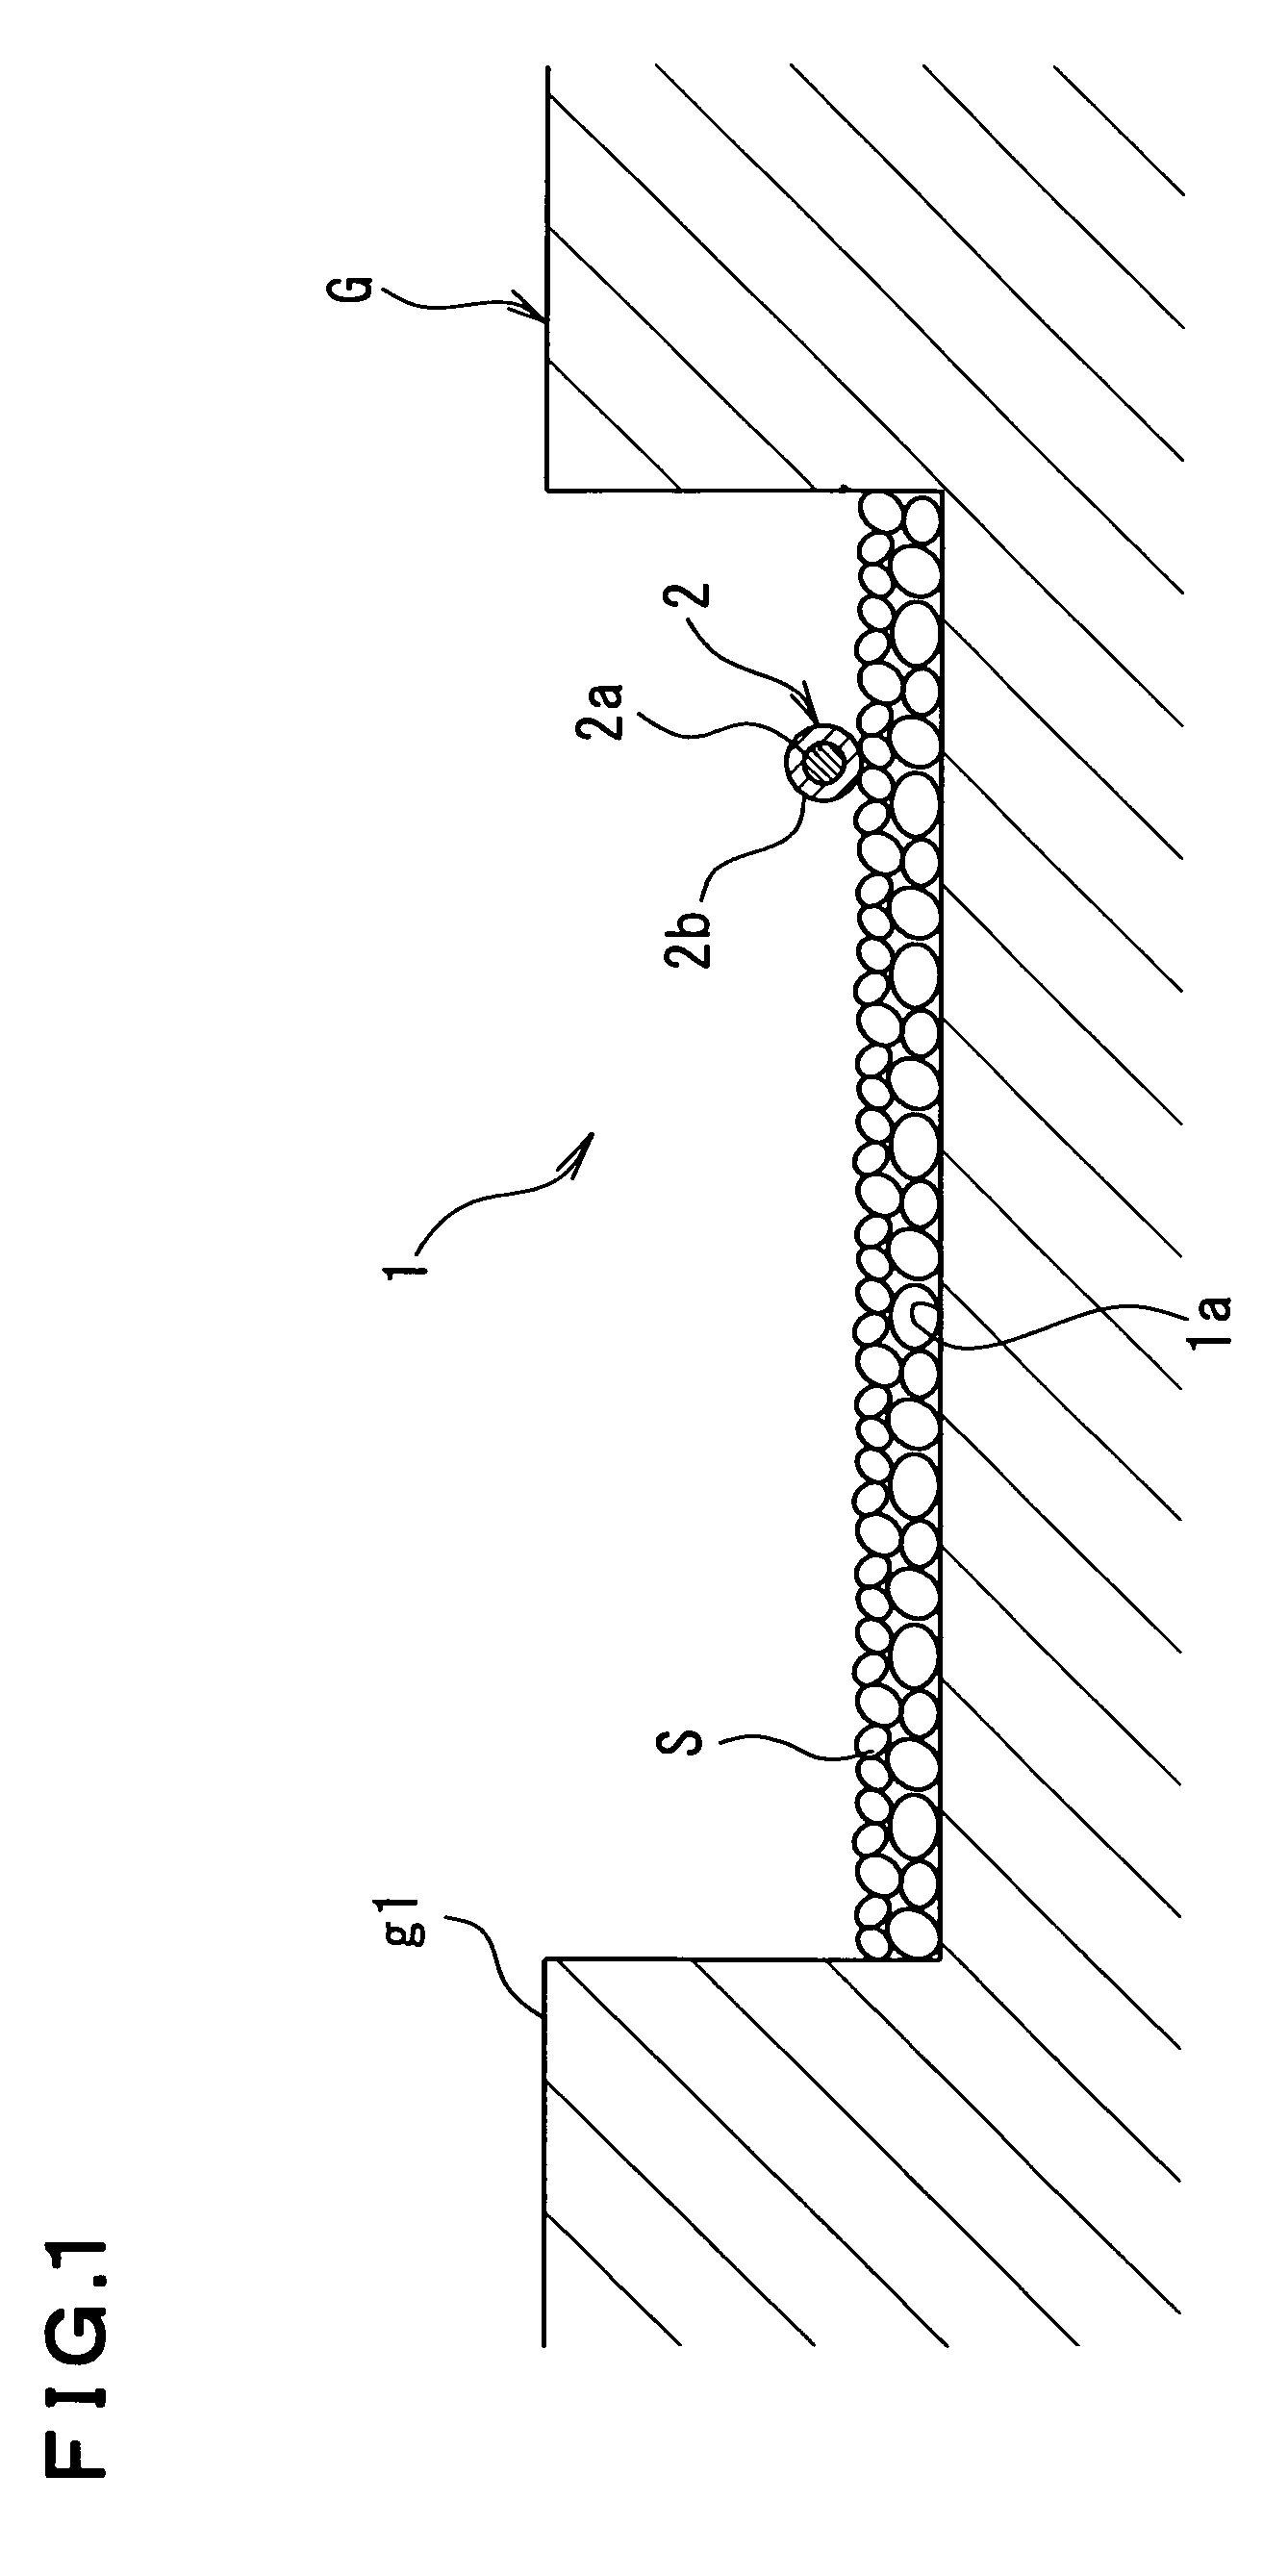 Grounding device and method of constructing the same